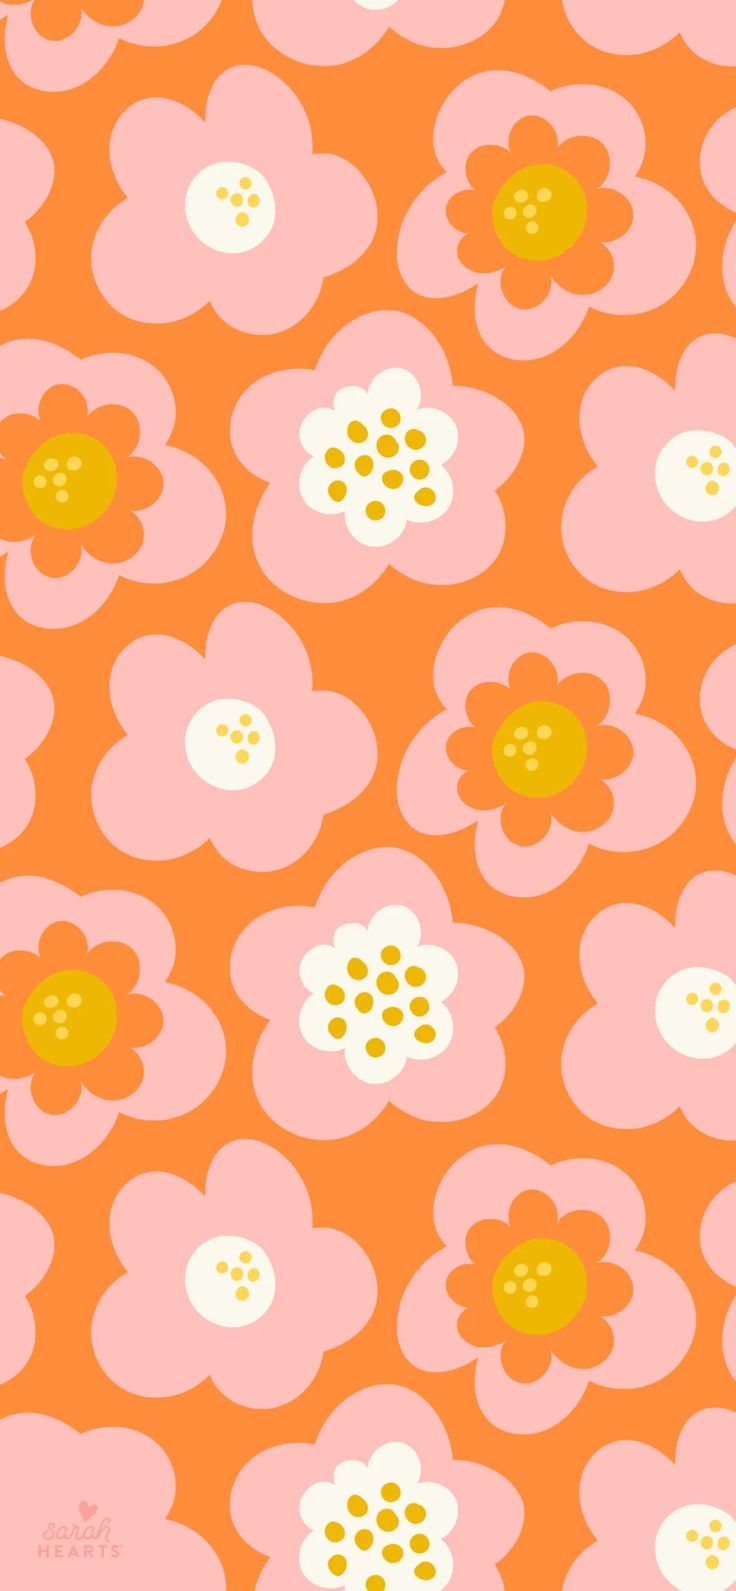 A pattern of flowers in orange and white - May